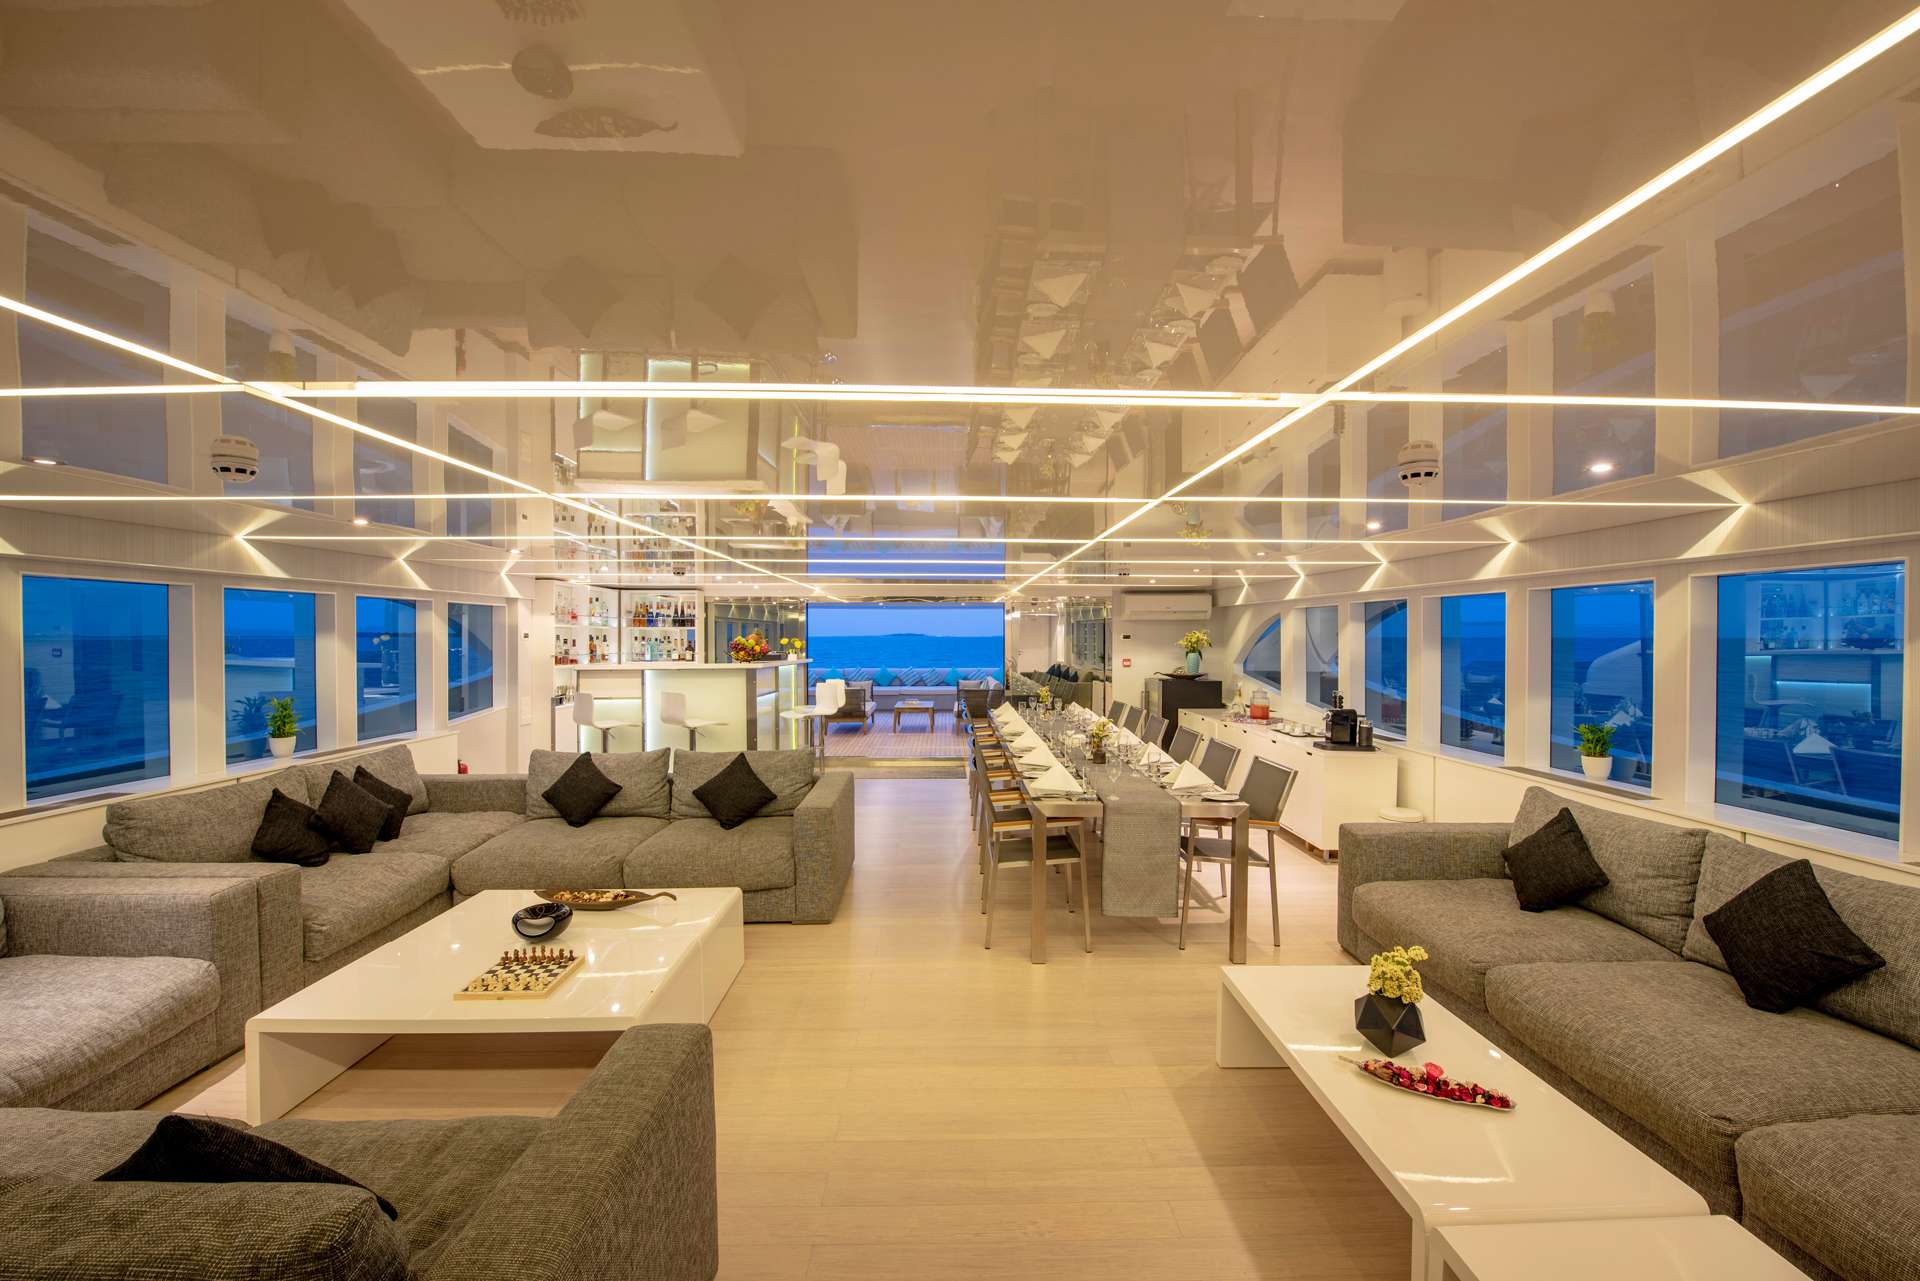 searex - Superyacht charter Thailand & Boat hire in Indian Ocean & SE Asia 2